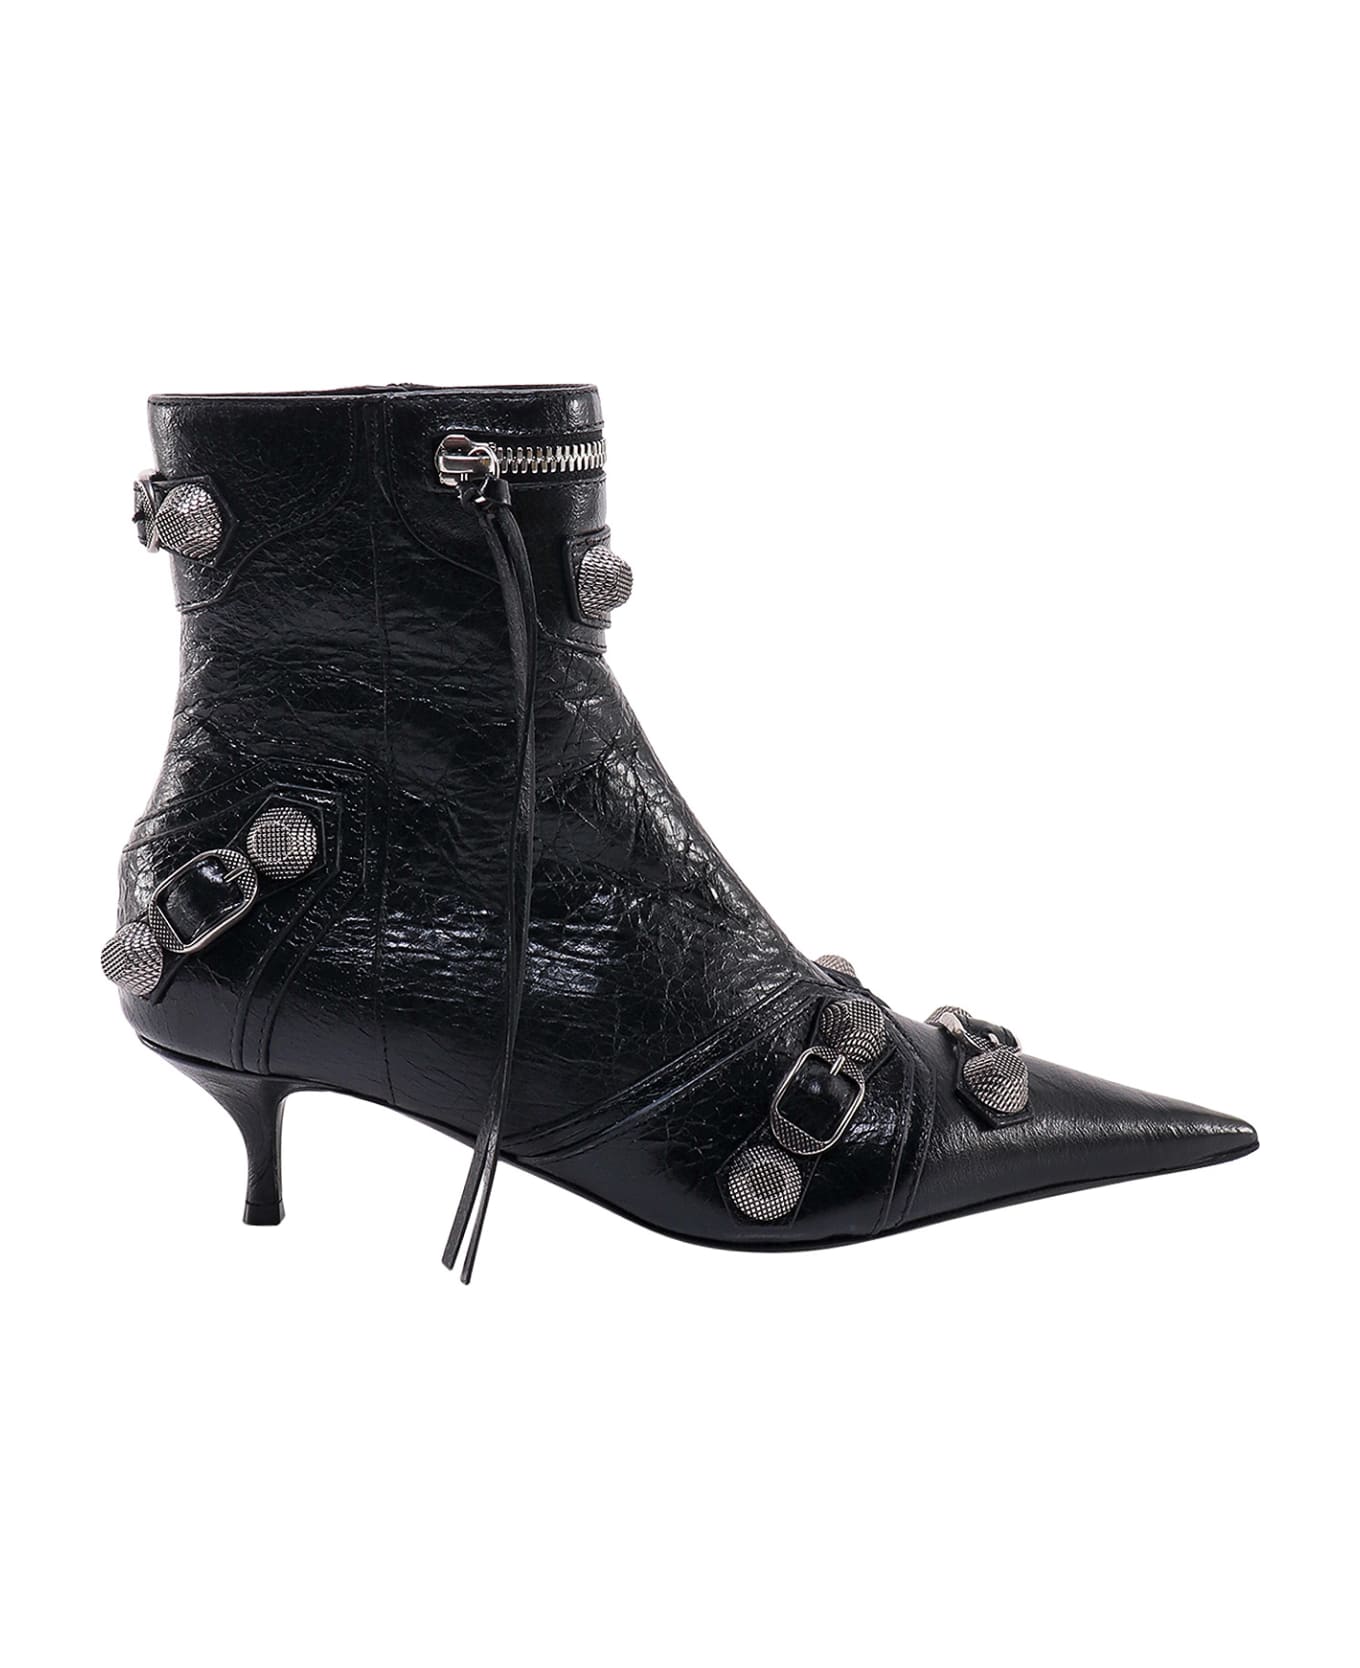 Balenciaga Low Heels Ankle Boots In Black Leather - Black